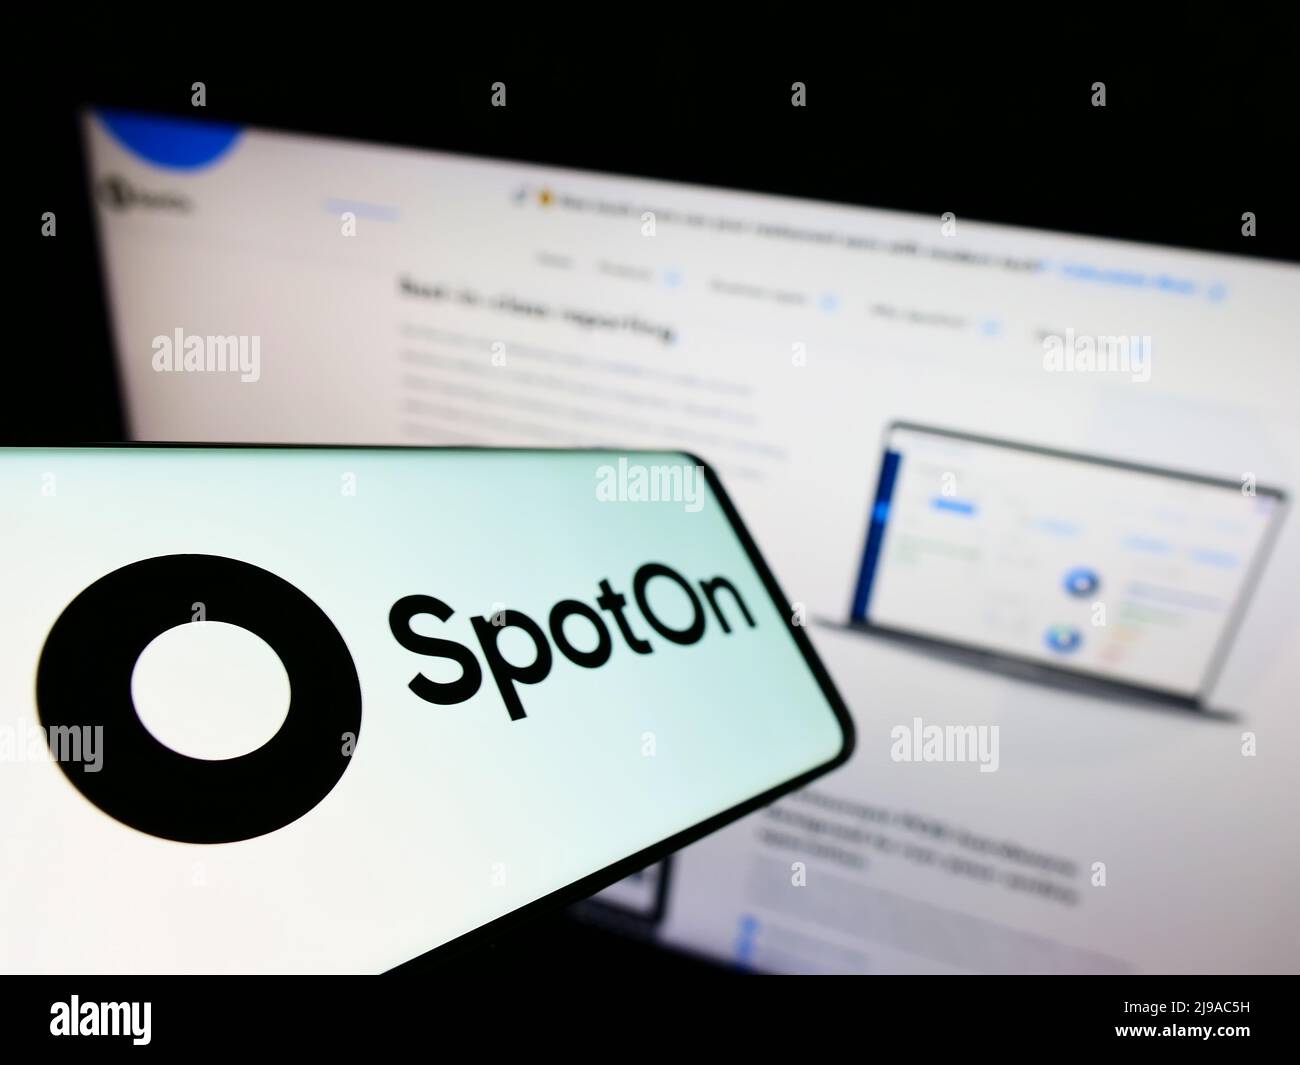 Smartphone with logo of American software company SpotOn Transact LLC on screen in front of website. Focus on center-left of phone display. Stock Photo